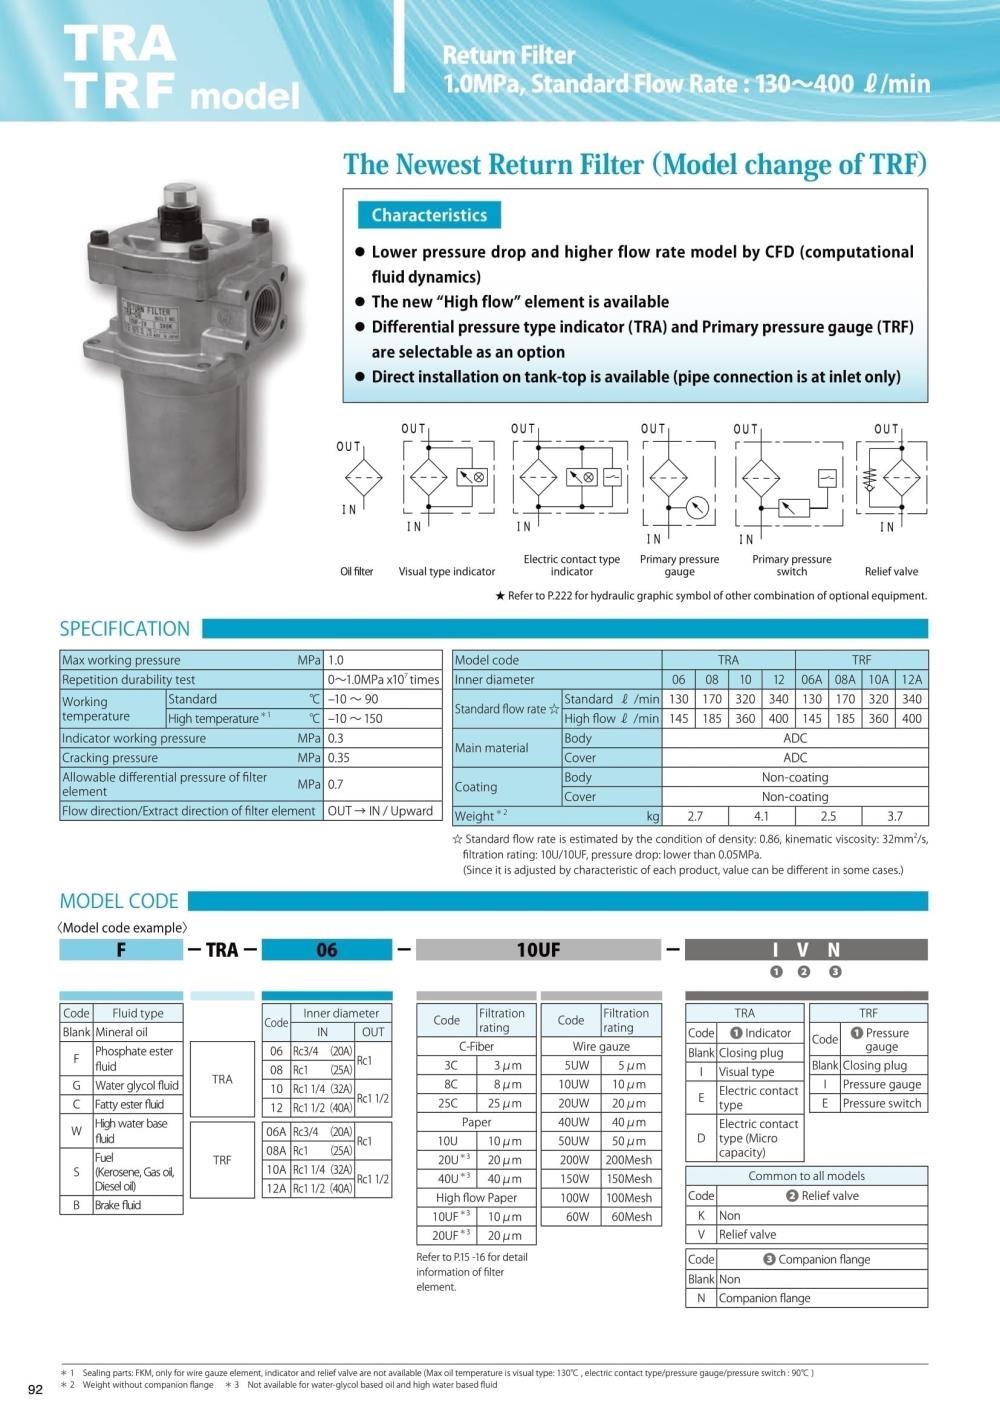 TAISEI Oil Filter TRA-12-3C-IVN Series,TRA-12-3C-IVN, TRA-12-8C-IVN, TRA-12-25C-IVN, TRA-12-10U-IVN, TRA-12-20U-IVN, TRA-12-40U-IVN, TRA-12-10UF-IVN, TRA-12-20UF-IVN, TRA-12-5UW-IVN, TRA-12-10UW-IVN, TRA-12-20UW-IVN, TRA-12-40UW-IVN, TRA-12-50UW-IVN, TRA-12-200W-IVN, TRA-12-150W-IVN, TRA-12-100W-IVN, TRA-12-60W-IVN, TAISEI, Oil Filter, Return Filter,TAISEI,Machinery and Process Equipment/Filters/Gas & Oil